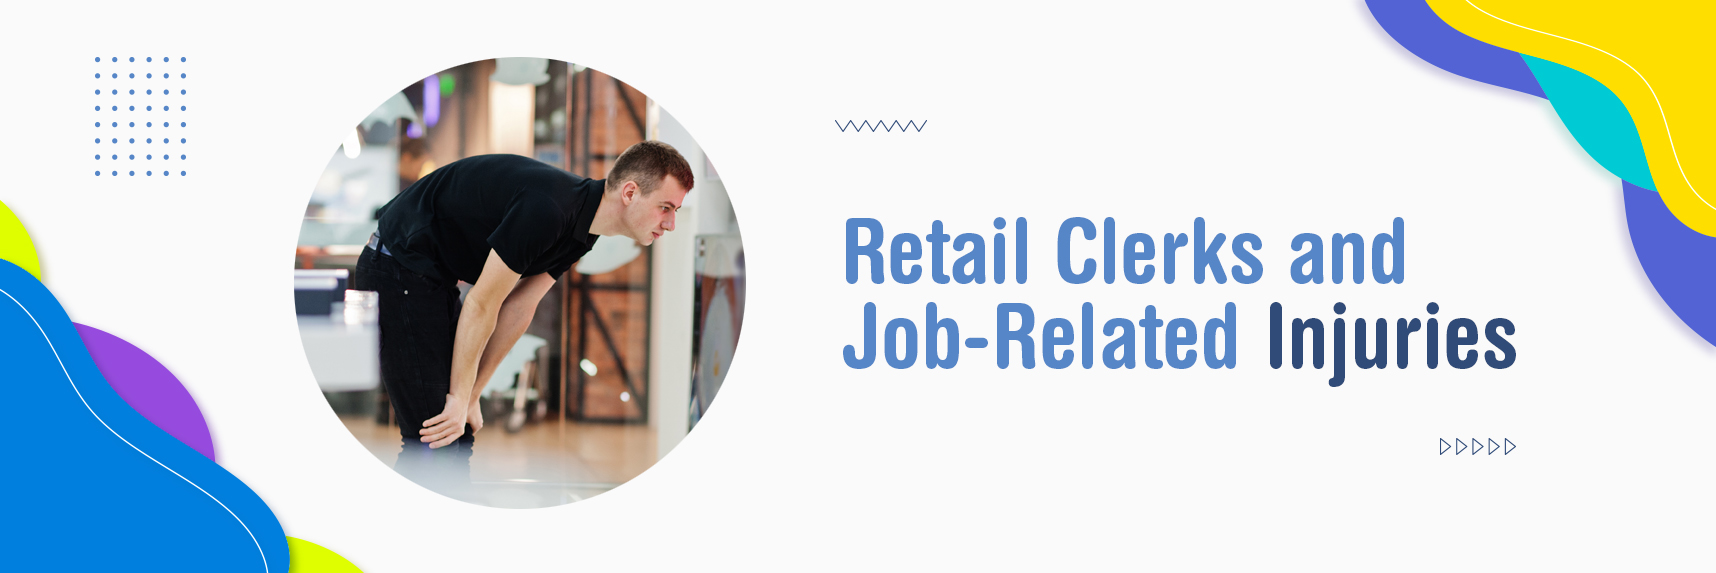 Retail Clerks and Job-Related Injuries